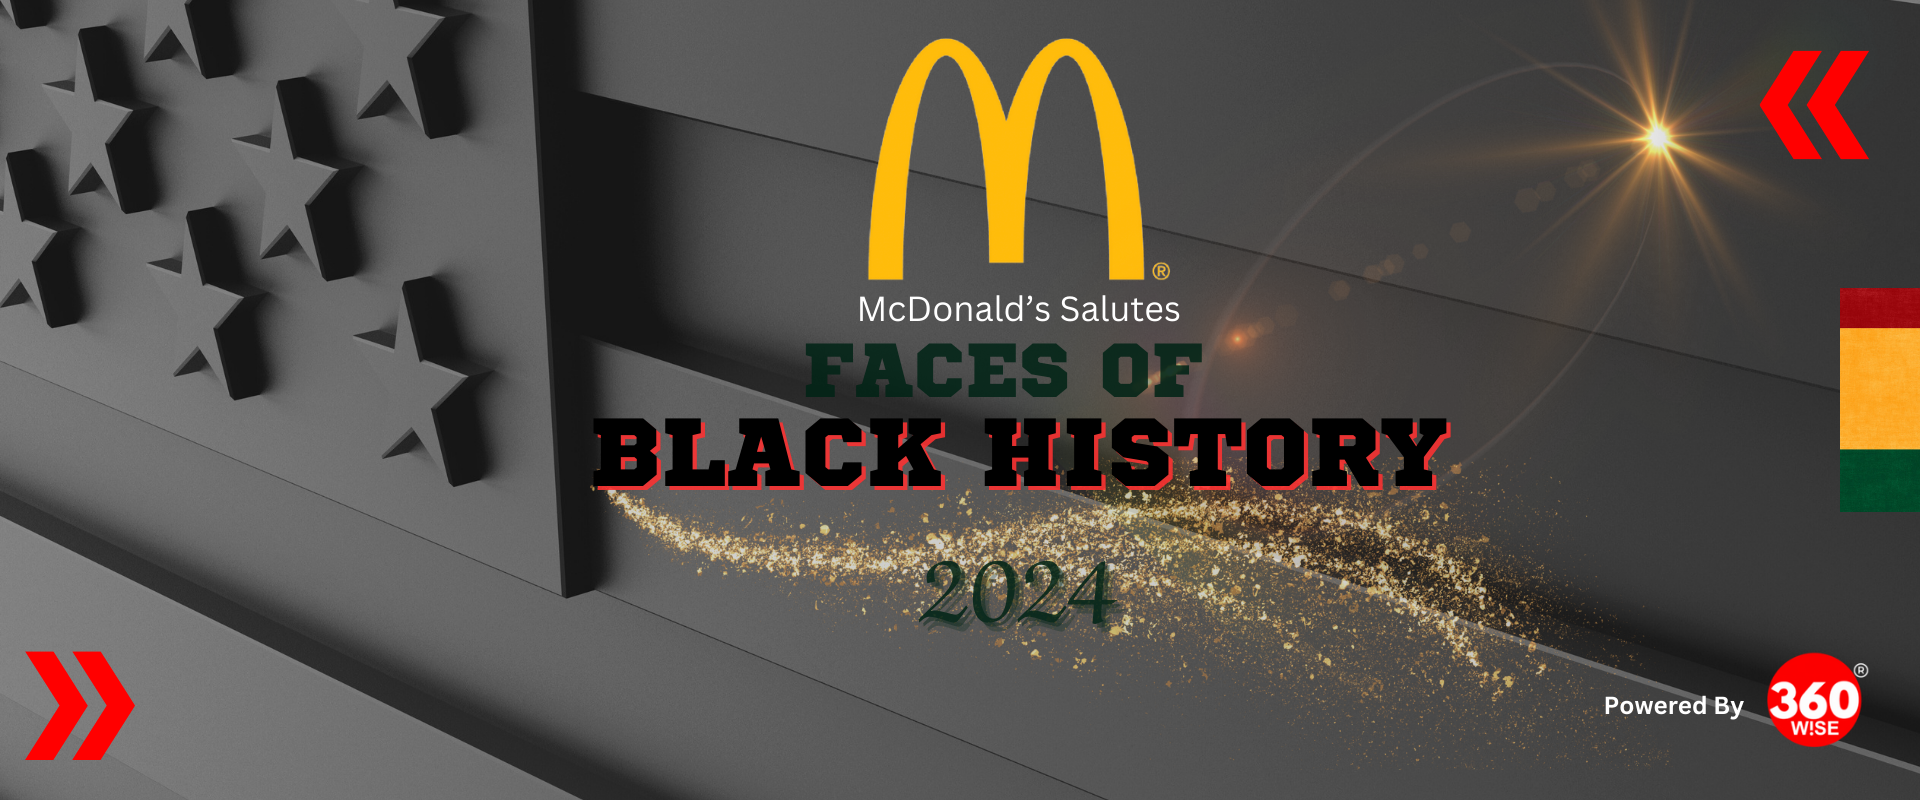 McDonald's Faces of Black History 2024: Powered by 360WiSE